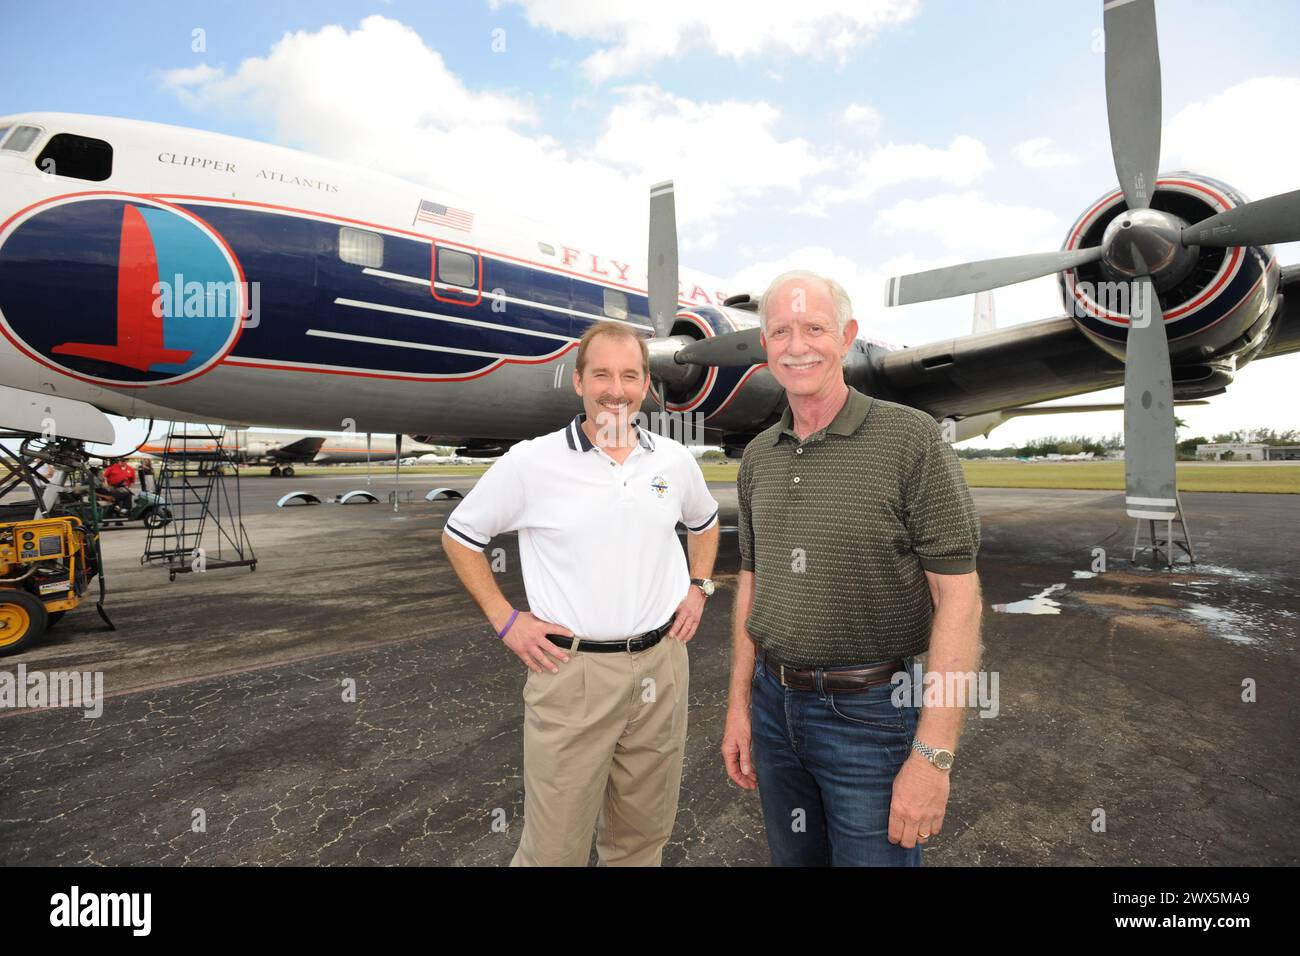 MIAMI, FL - NOVEMBER 17: Captain 'Sully' Sullenberger and Co-pilot Jeff Skiles pose with the Historical 1958 DC7 for a benefit hosted by Historical Flight Foundation. Chesley Burnett "Sully" Sullenberger, III (born January 23, 1951) is a retired airline captain and aviation safety consultant. He was hailed as a national hero in the United States when he successfully executed an emergency water landing of US Airways Flight 1549 in the Hudson River off Manhattan, New York City, after the aircraft was disabled by striking a flock of Canada geese during its initial climb out of LaGuardia Airport o Stock Photo